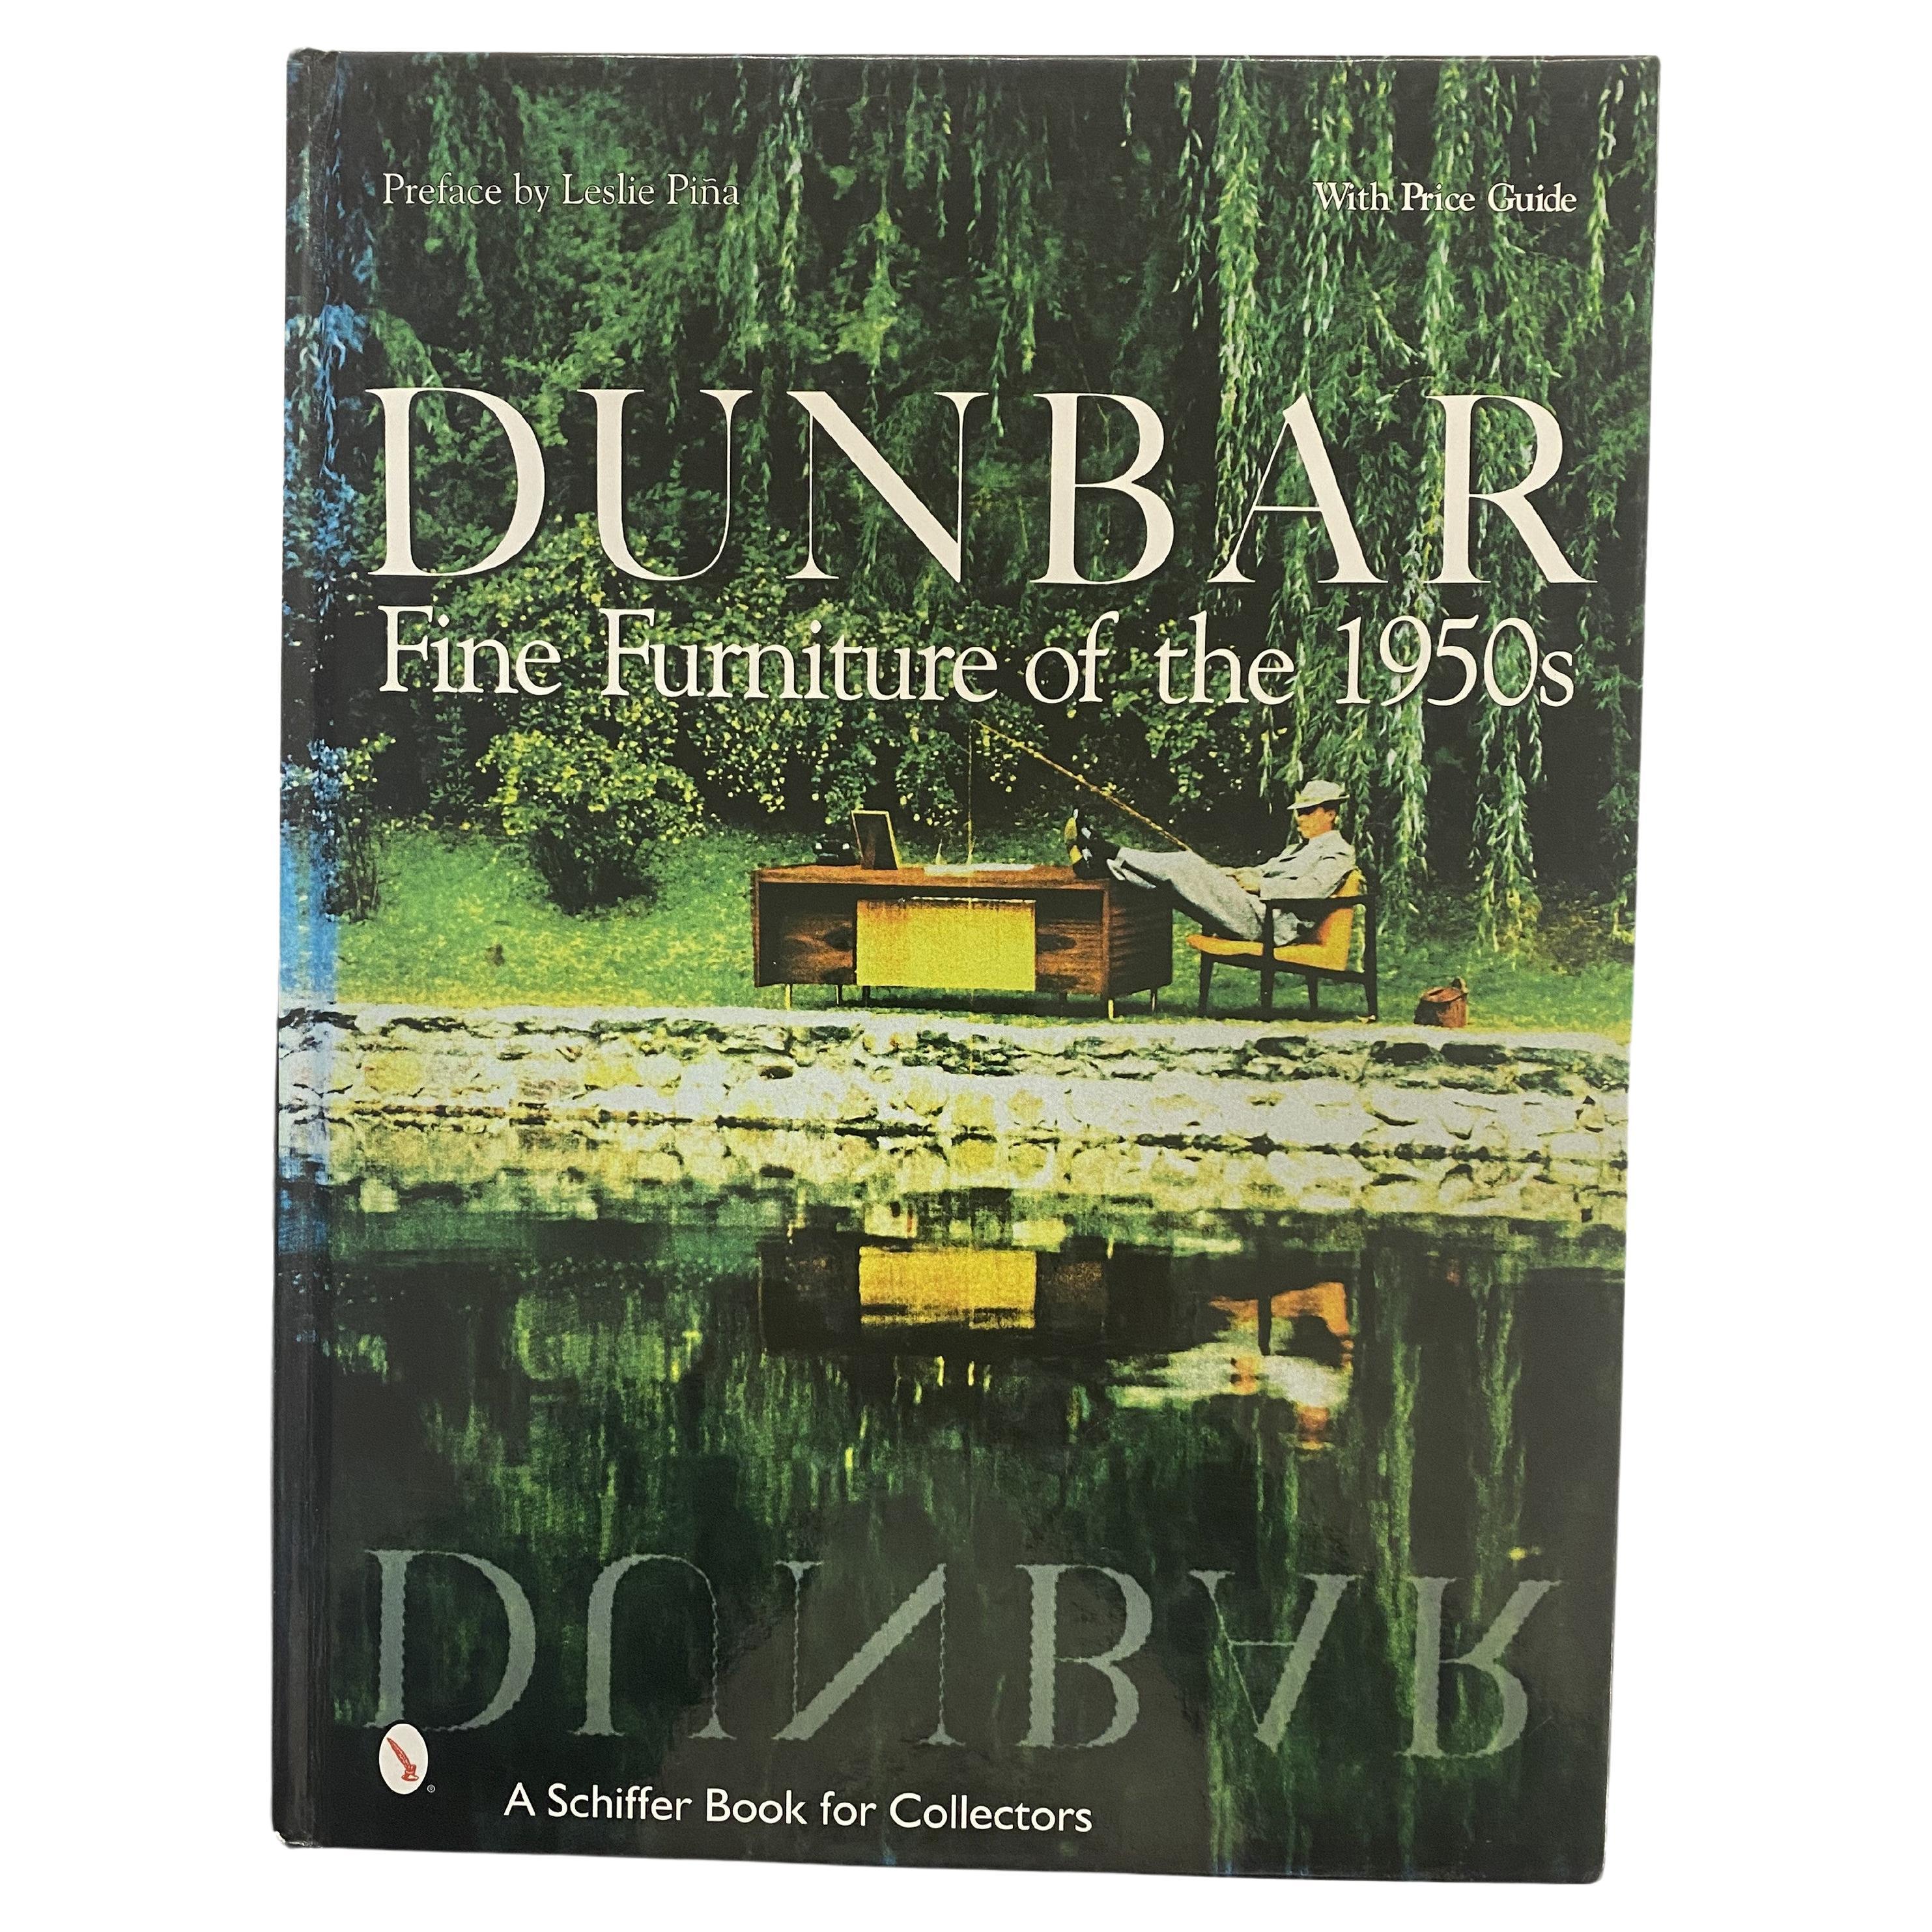 Dunbar: Fine Furniture of the 1950's preface by Leslie Pina (Book)